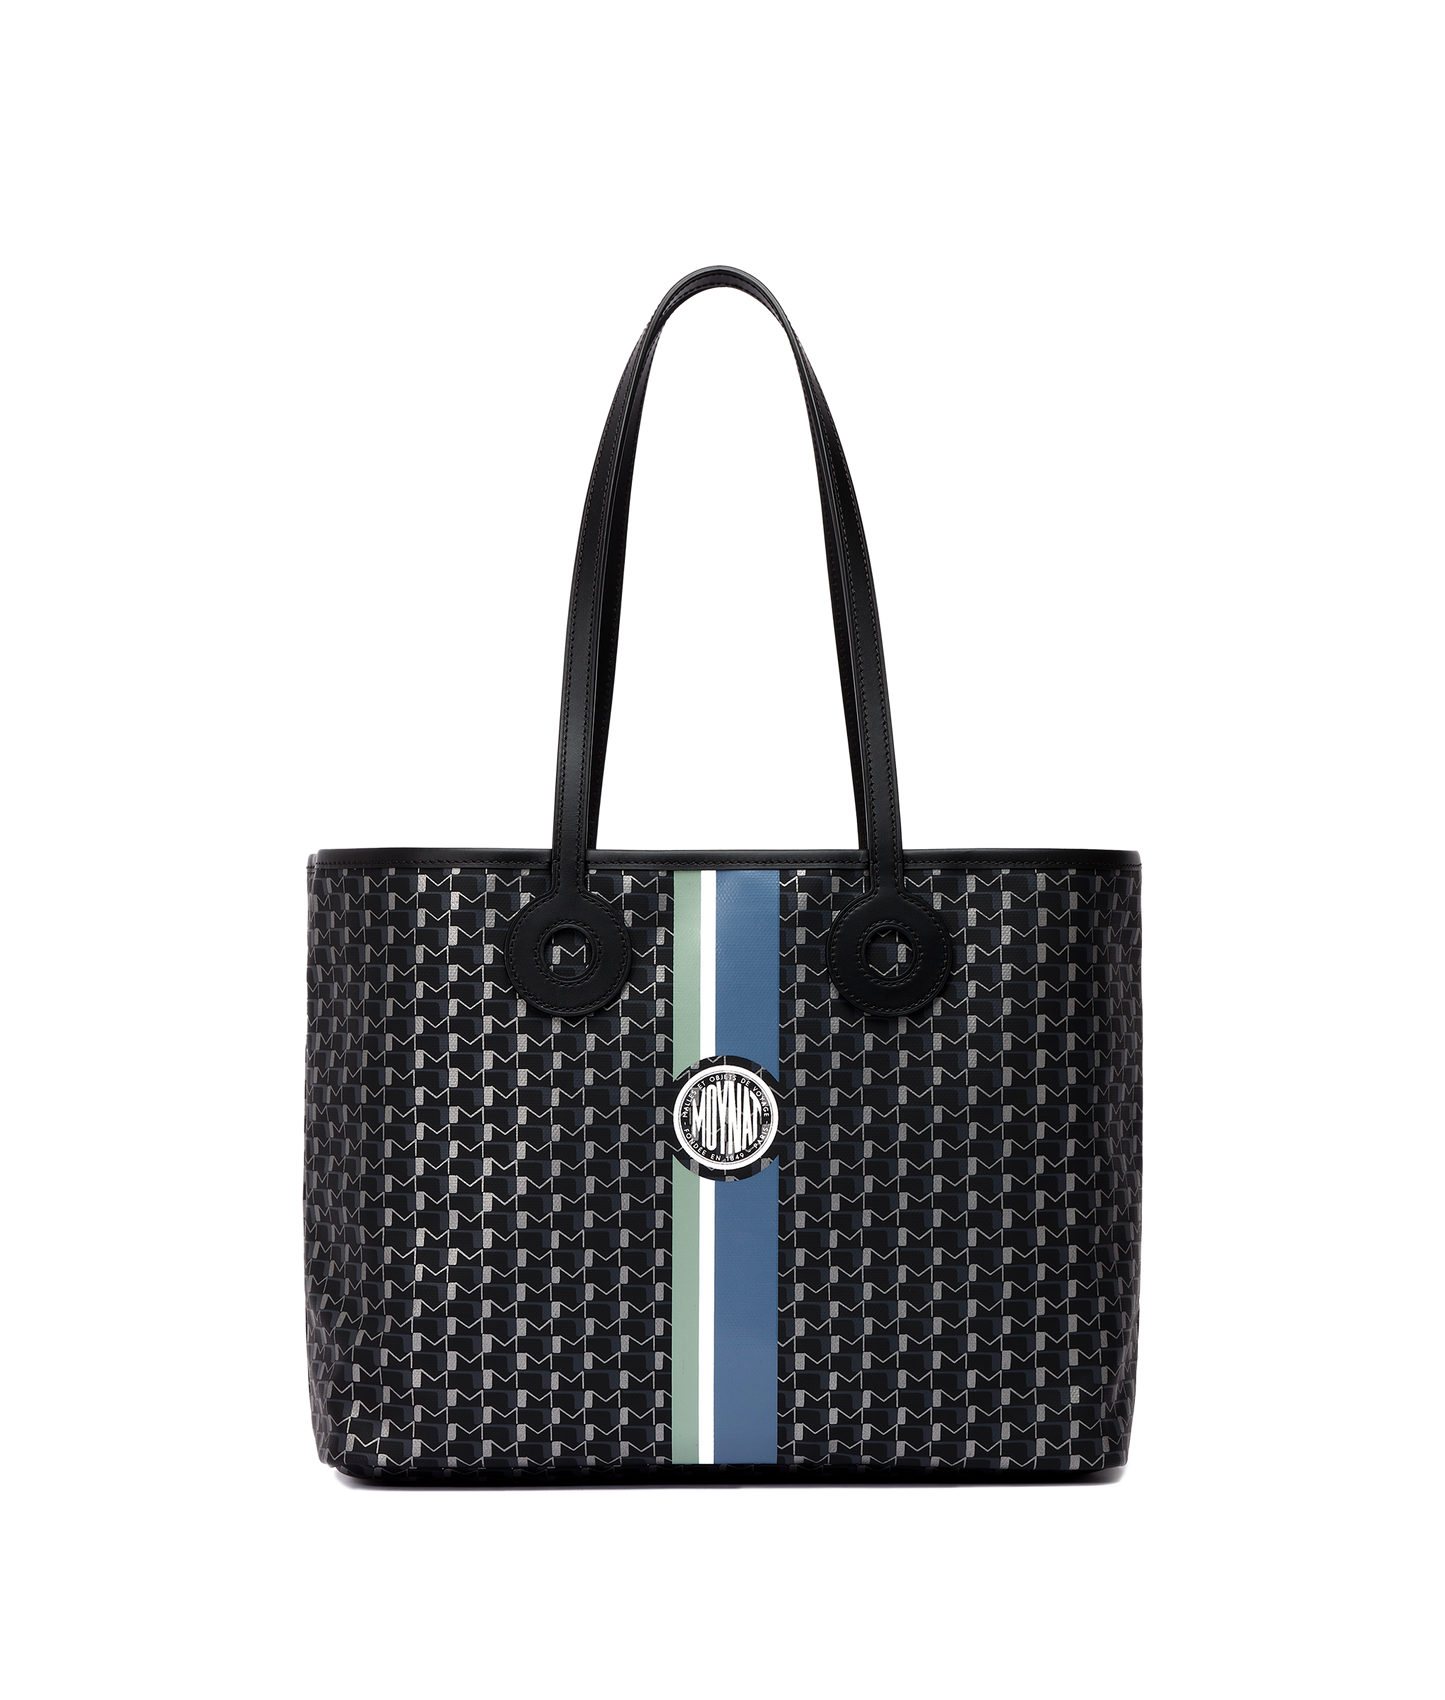 Women's Moynat Tote bags from $1,080